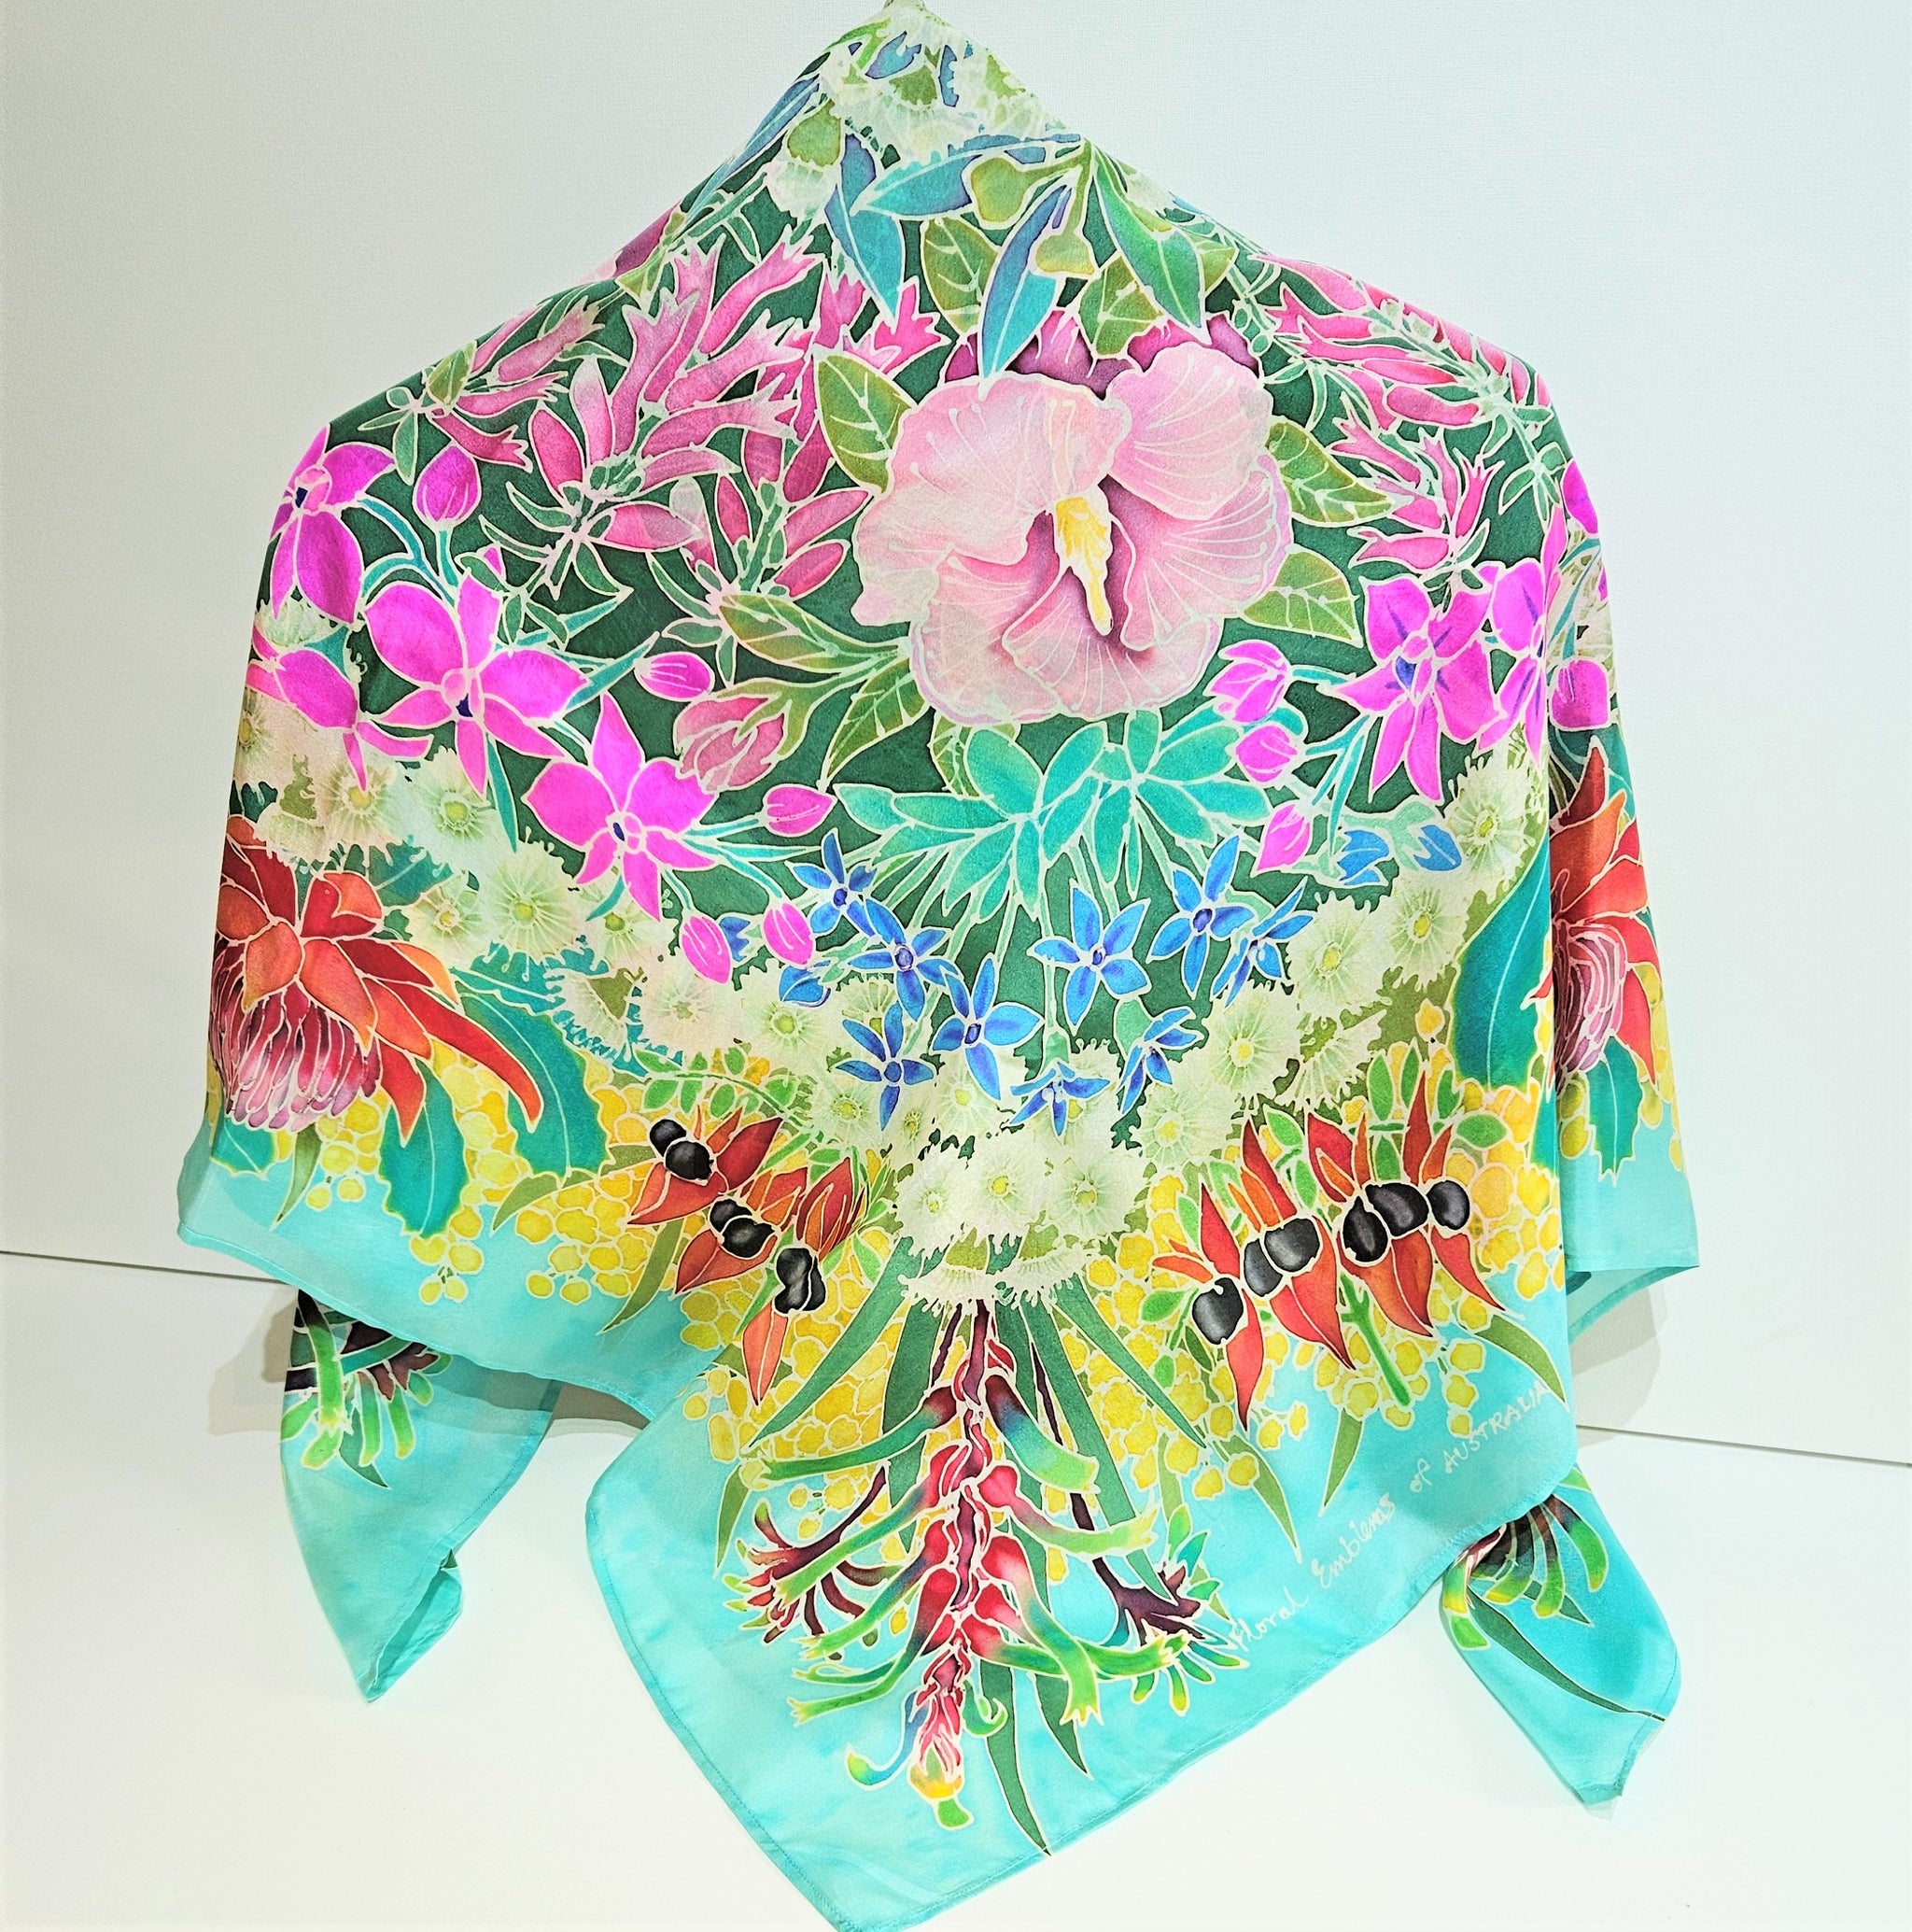 Jane Hinde's Handpainted scarves for Handcrafted- A perfect Gift